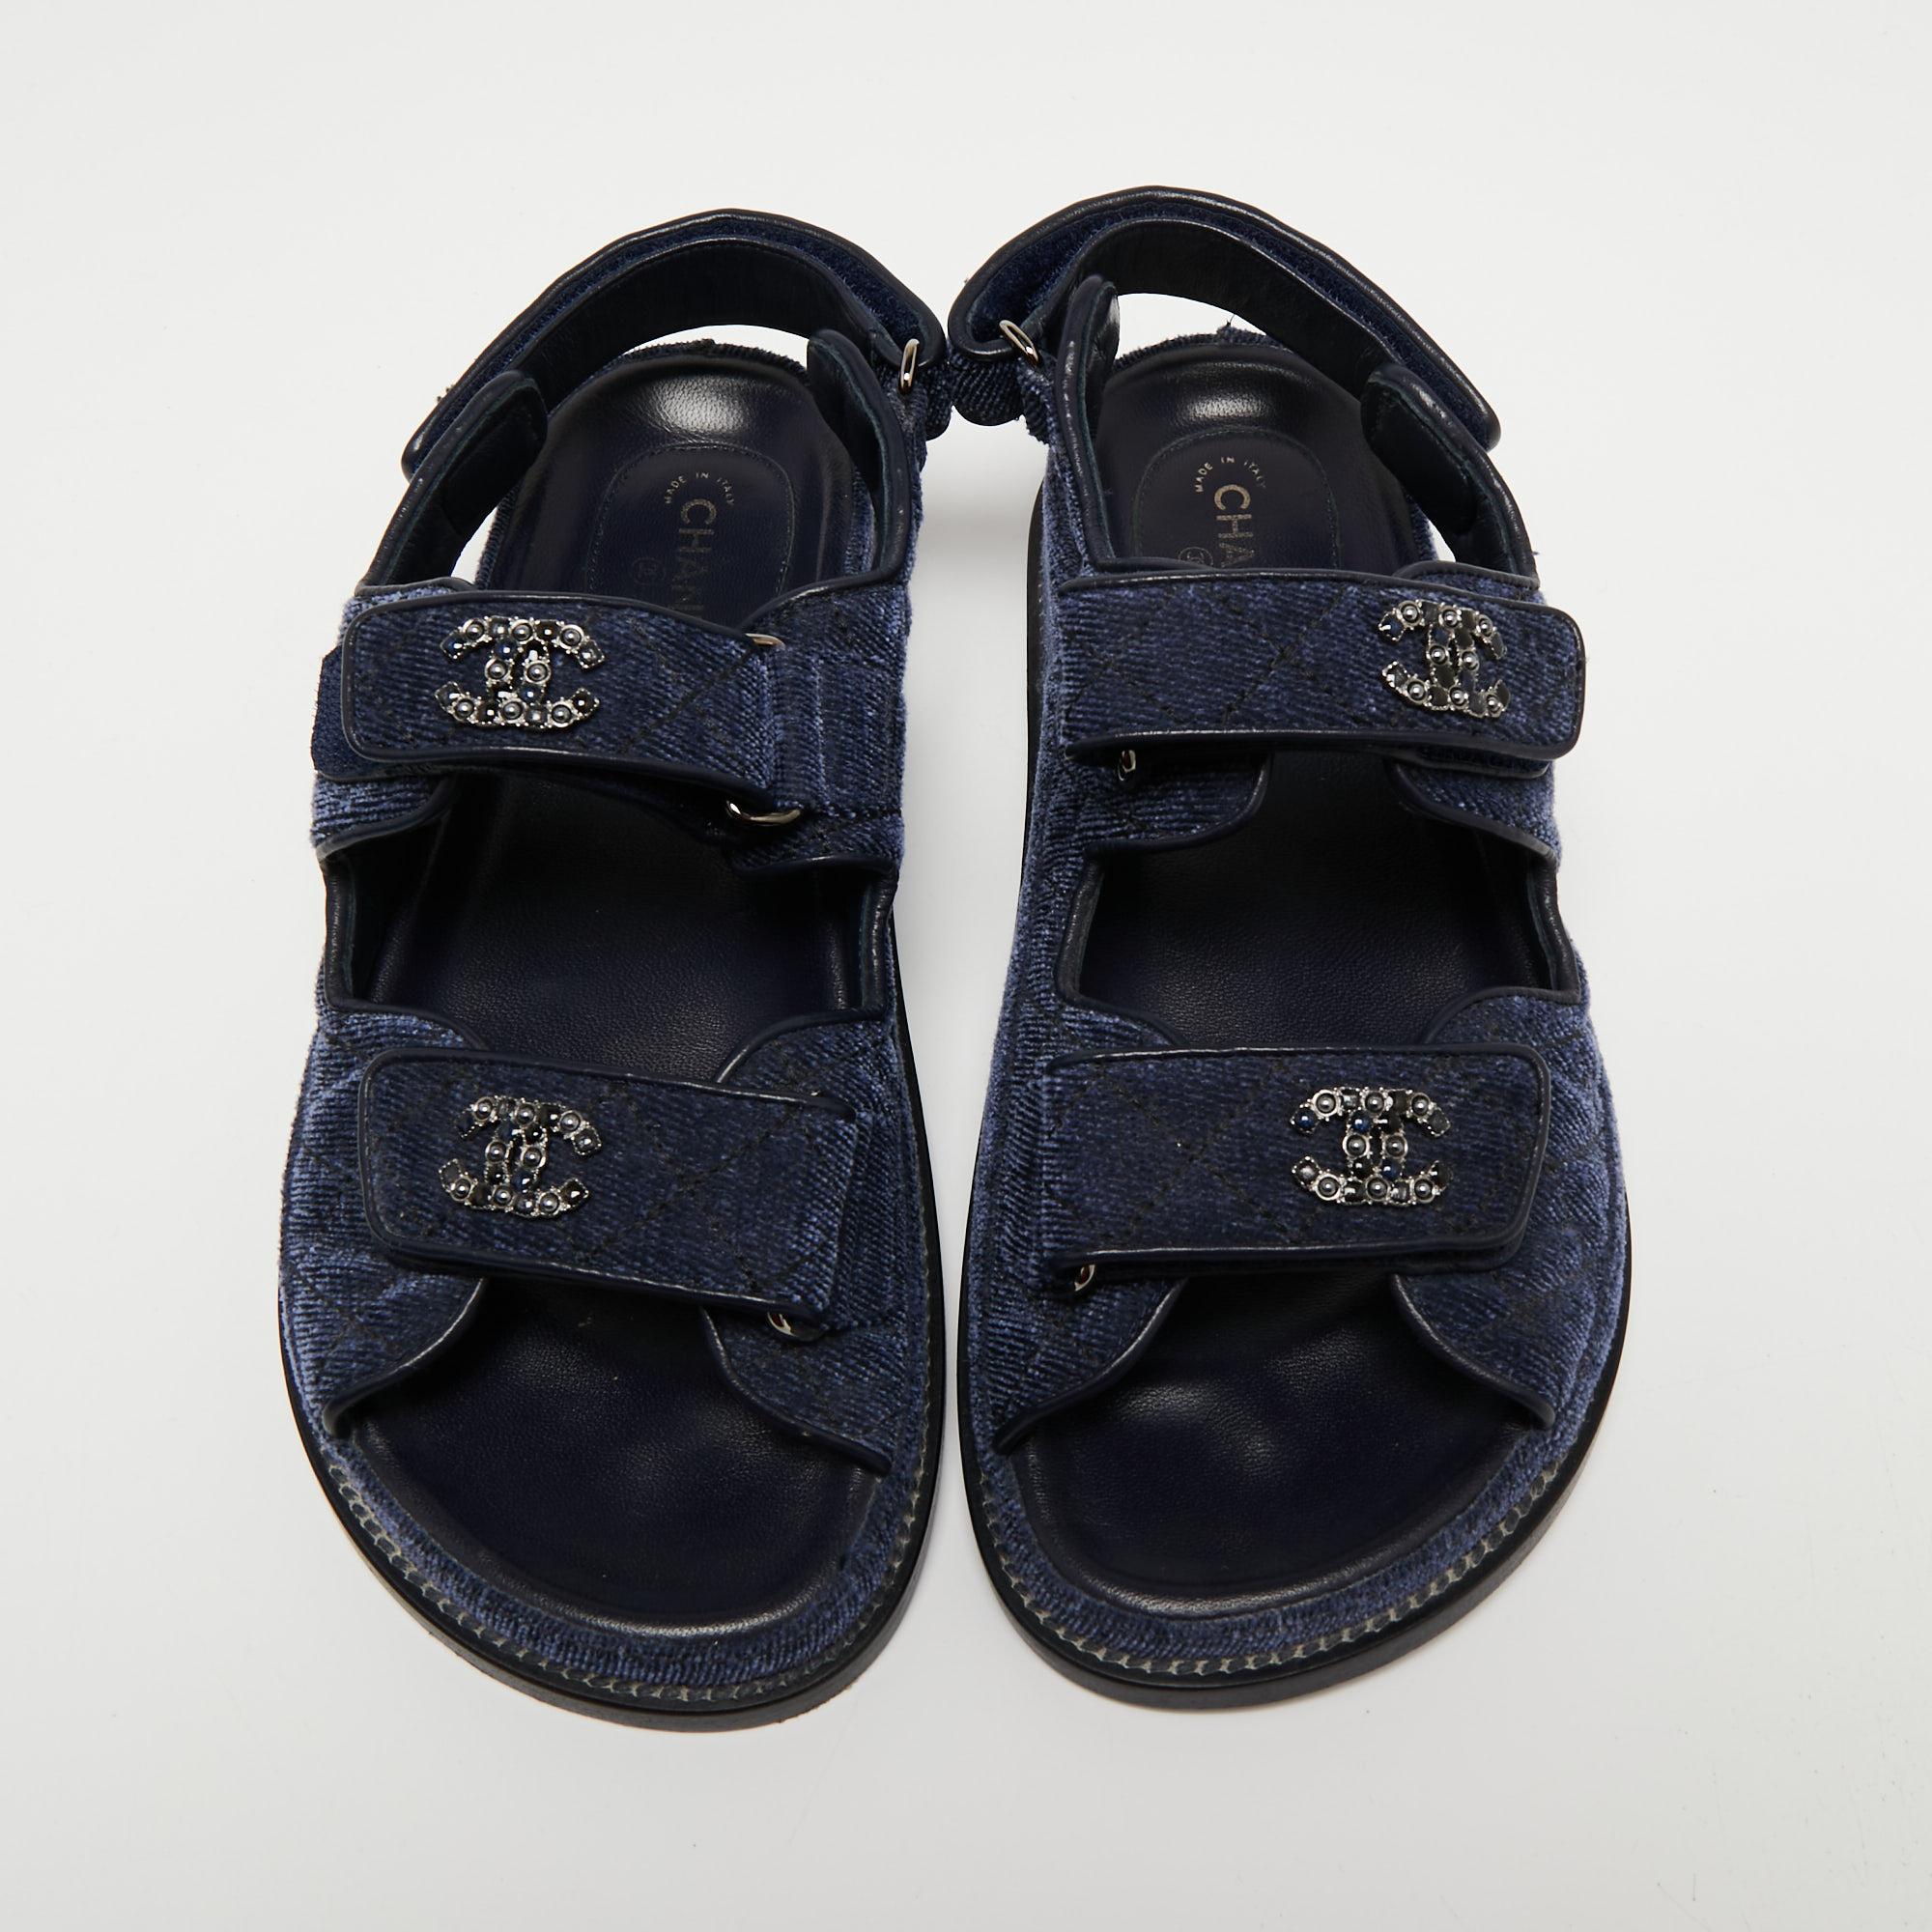 An ideal summer footwear, the Dad sandals were introduced by Chanel in Summer 2019. These navy blue shoes are made from denim with a trendy design and will easily set you apart from the crowd. This pair is complete with chunky soles and branded